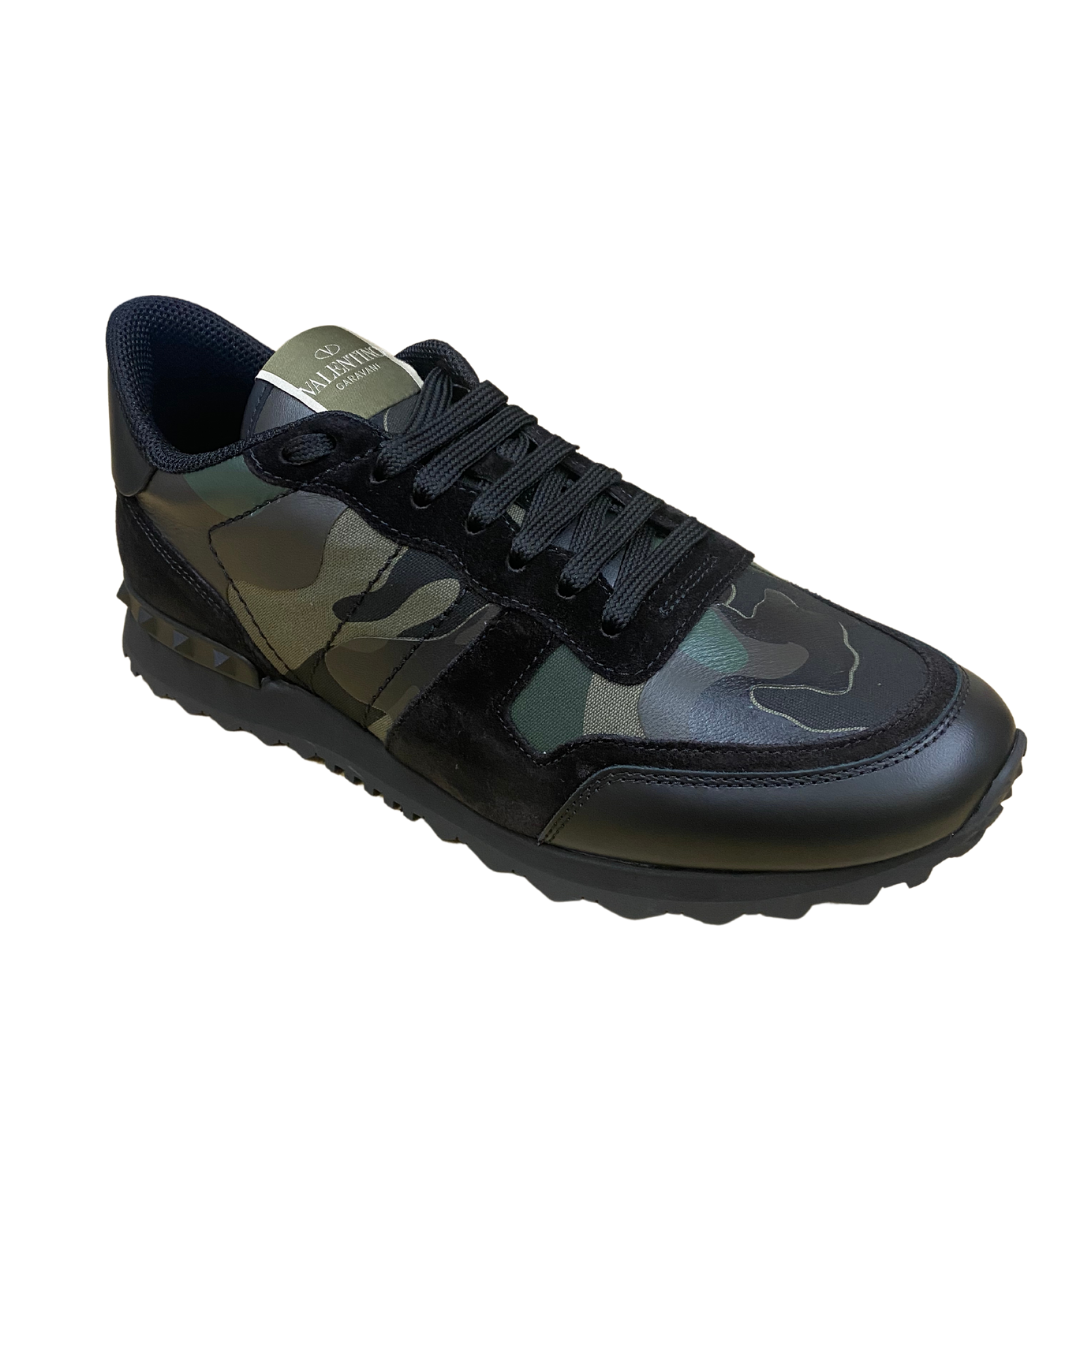 Valentino Camo Rockrunner Sneakers Army Green and Black